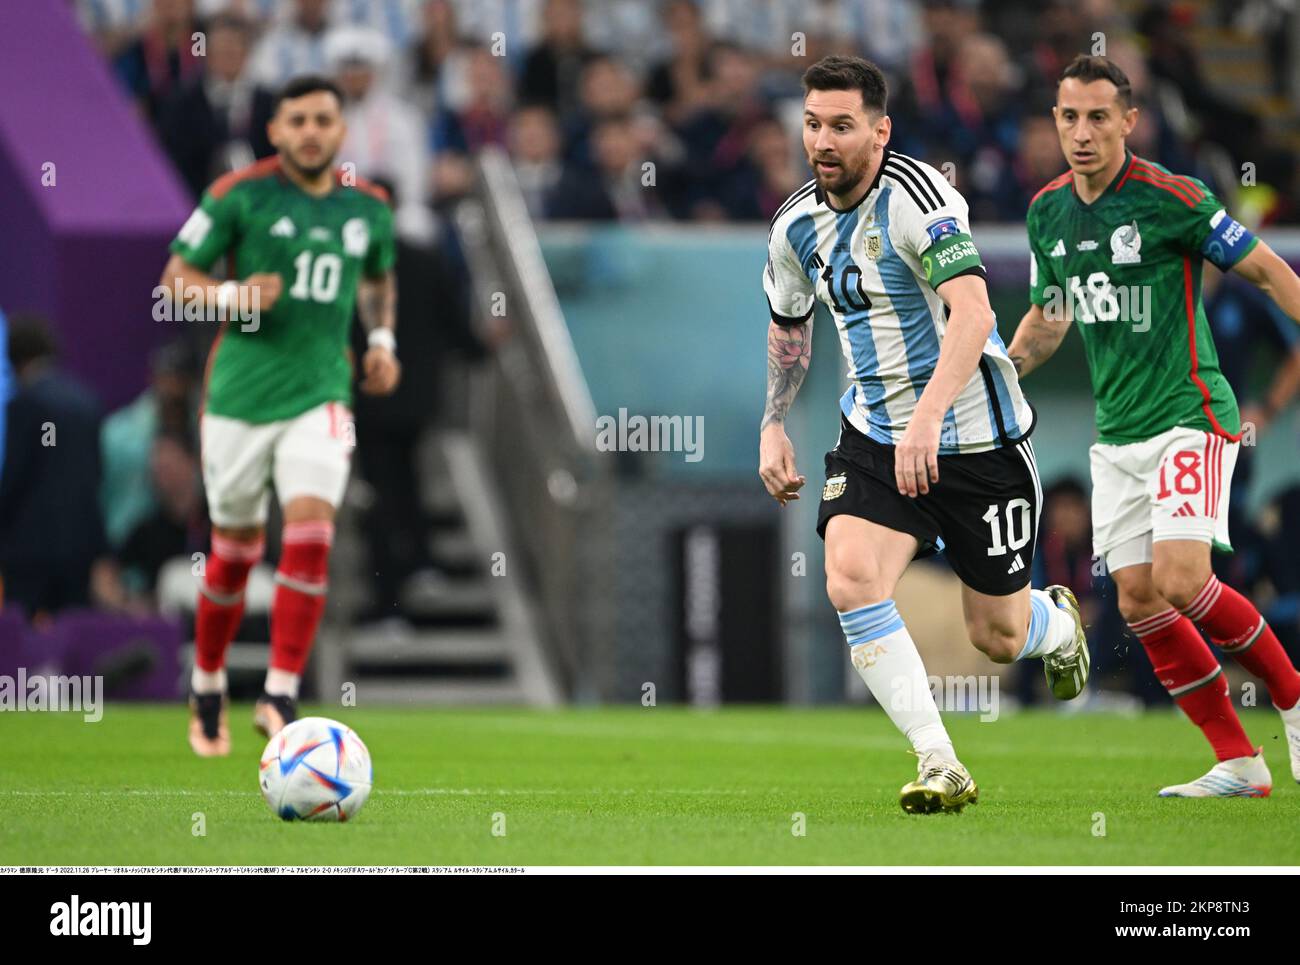 Lionel Messi (10) of Argentina and Andres Guardado(18) of Mexico during the FIFA World Cup Qatar 2022 Group C soccer match between Argentina 2-0 Mexico at Lusail Iconic Stadium on November 26, 2022, in Lusail, Qatar. (Photo by Takamoto Tokuhara/AFLO) Stock Photo